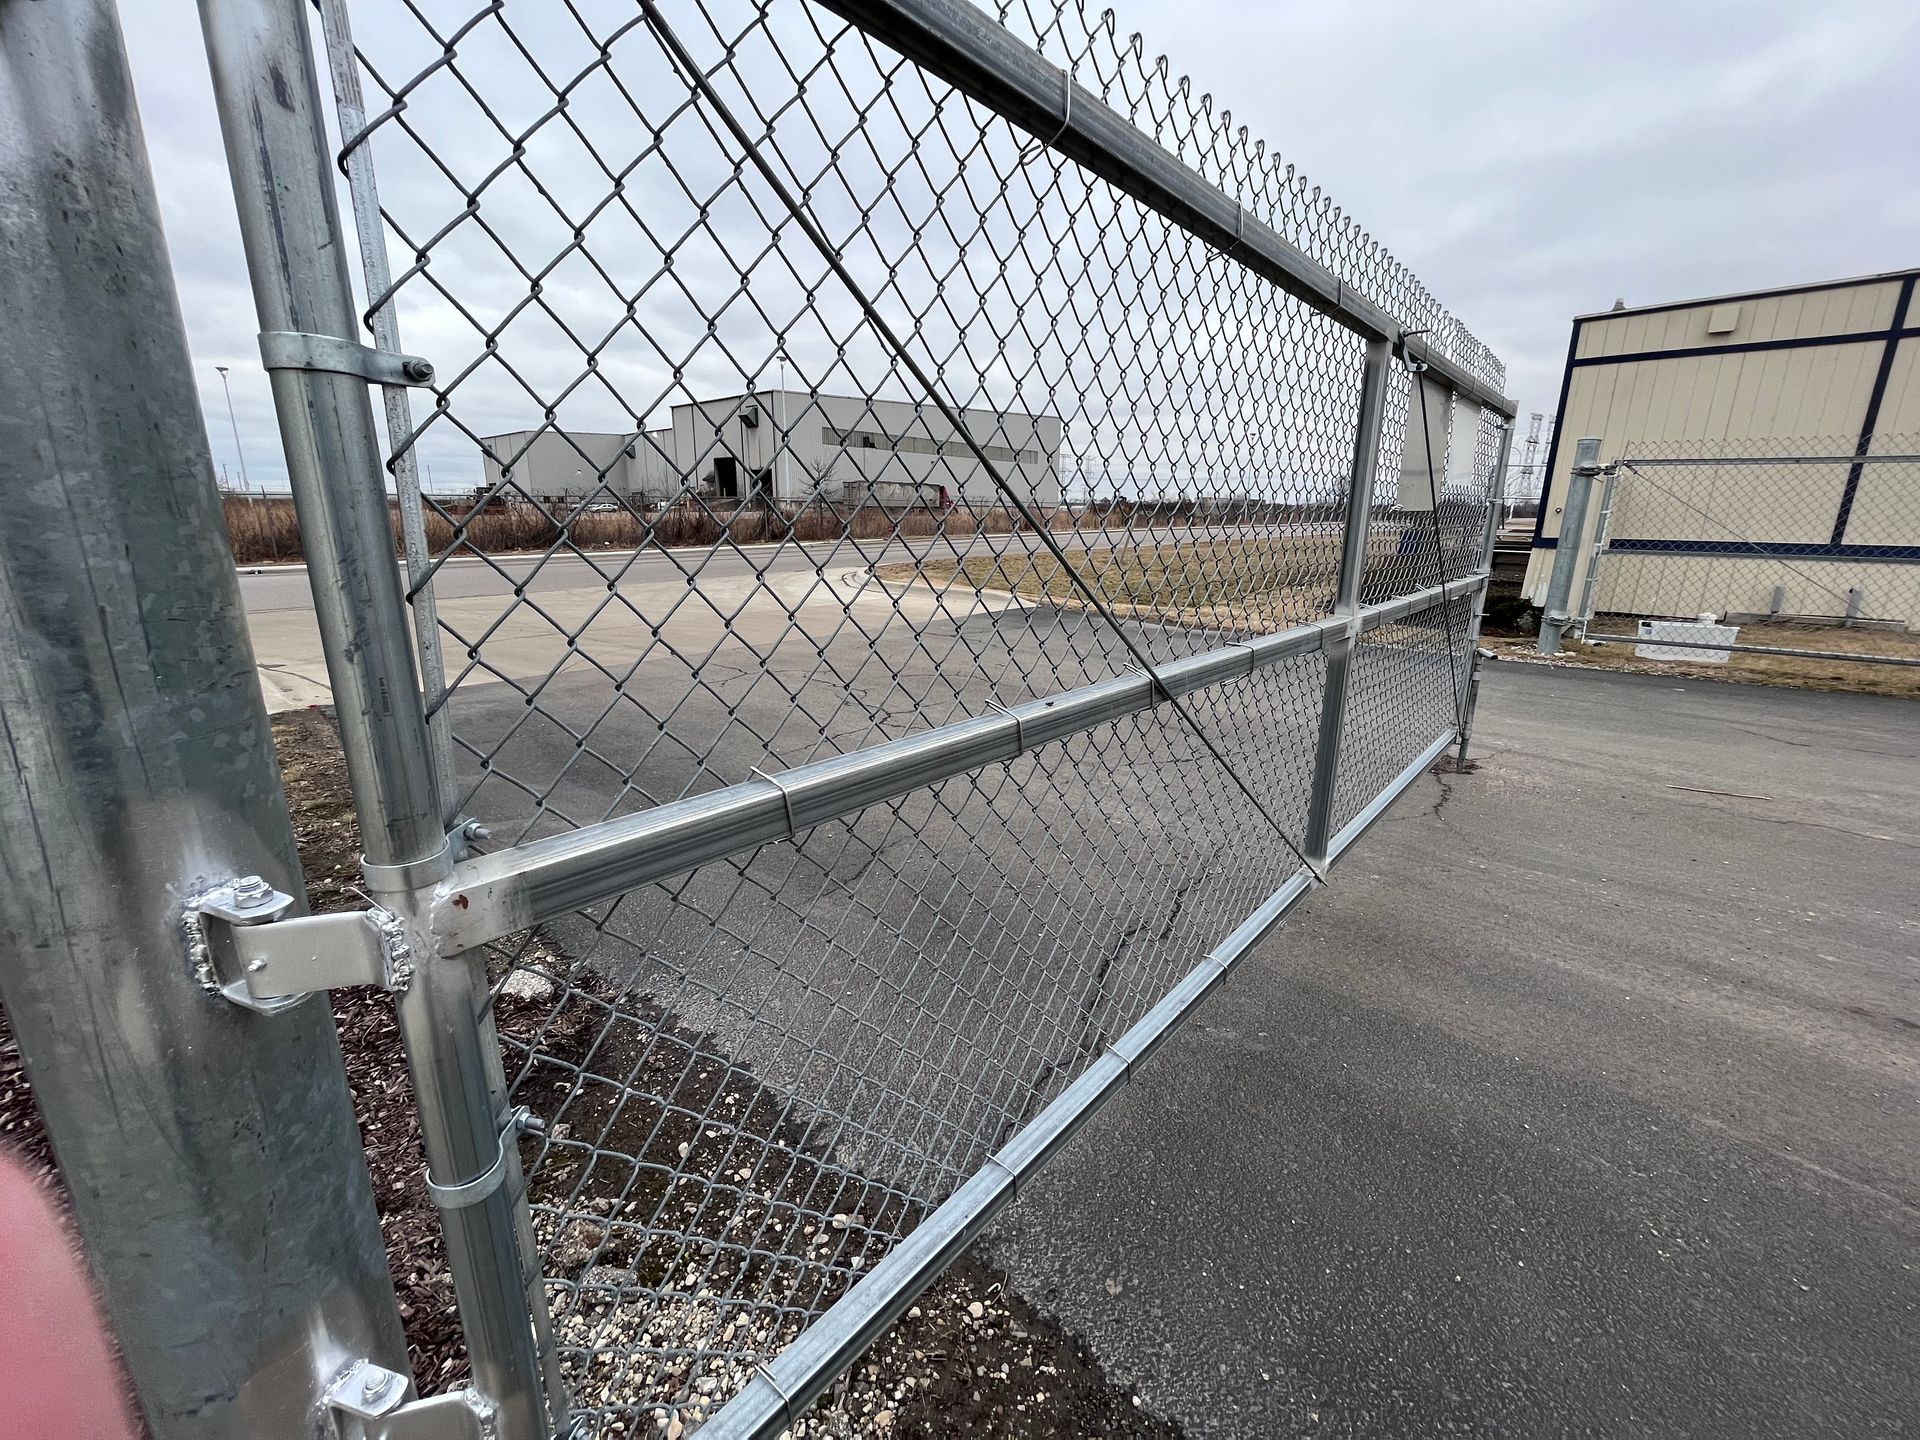 Commercial Chain Link Fencing Near Me